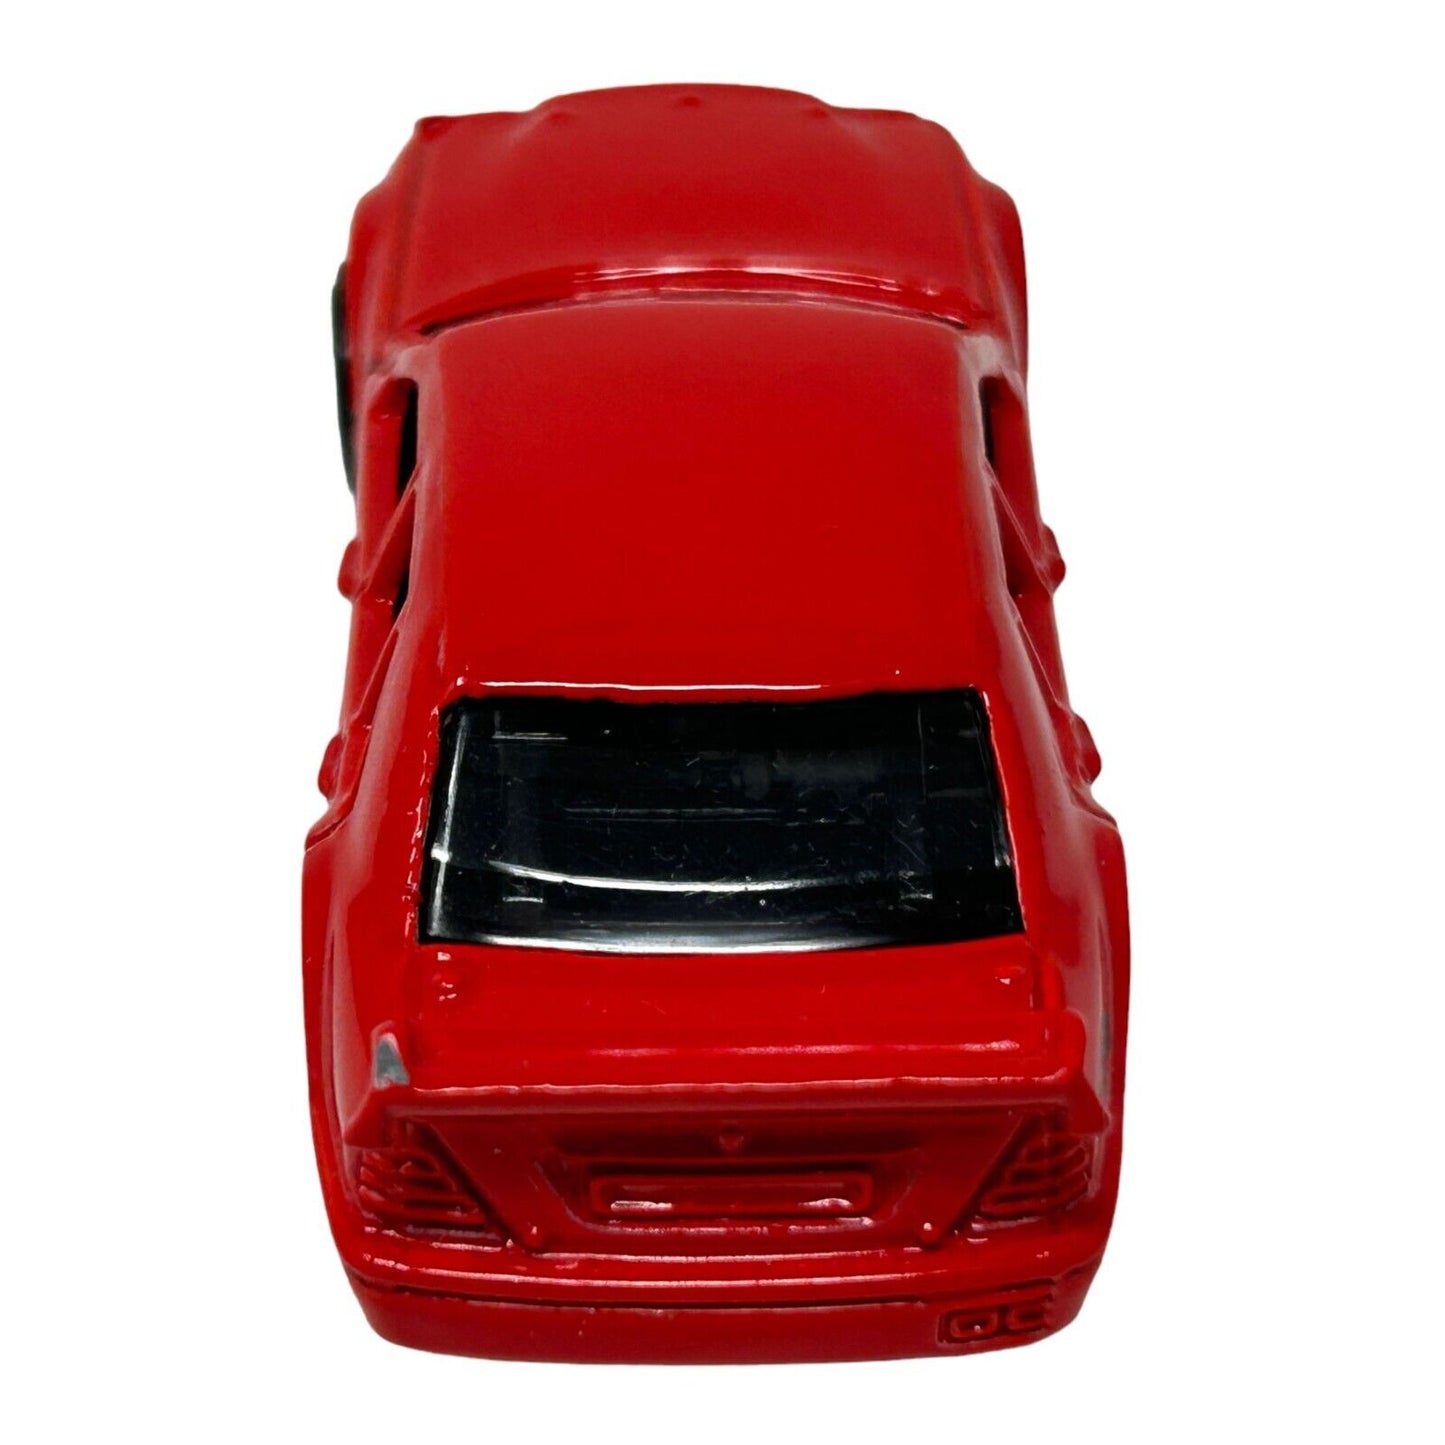 Mercedes Benz C Class Hot Wheels Collectible Diecast Car Red Vintage Y2Ks